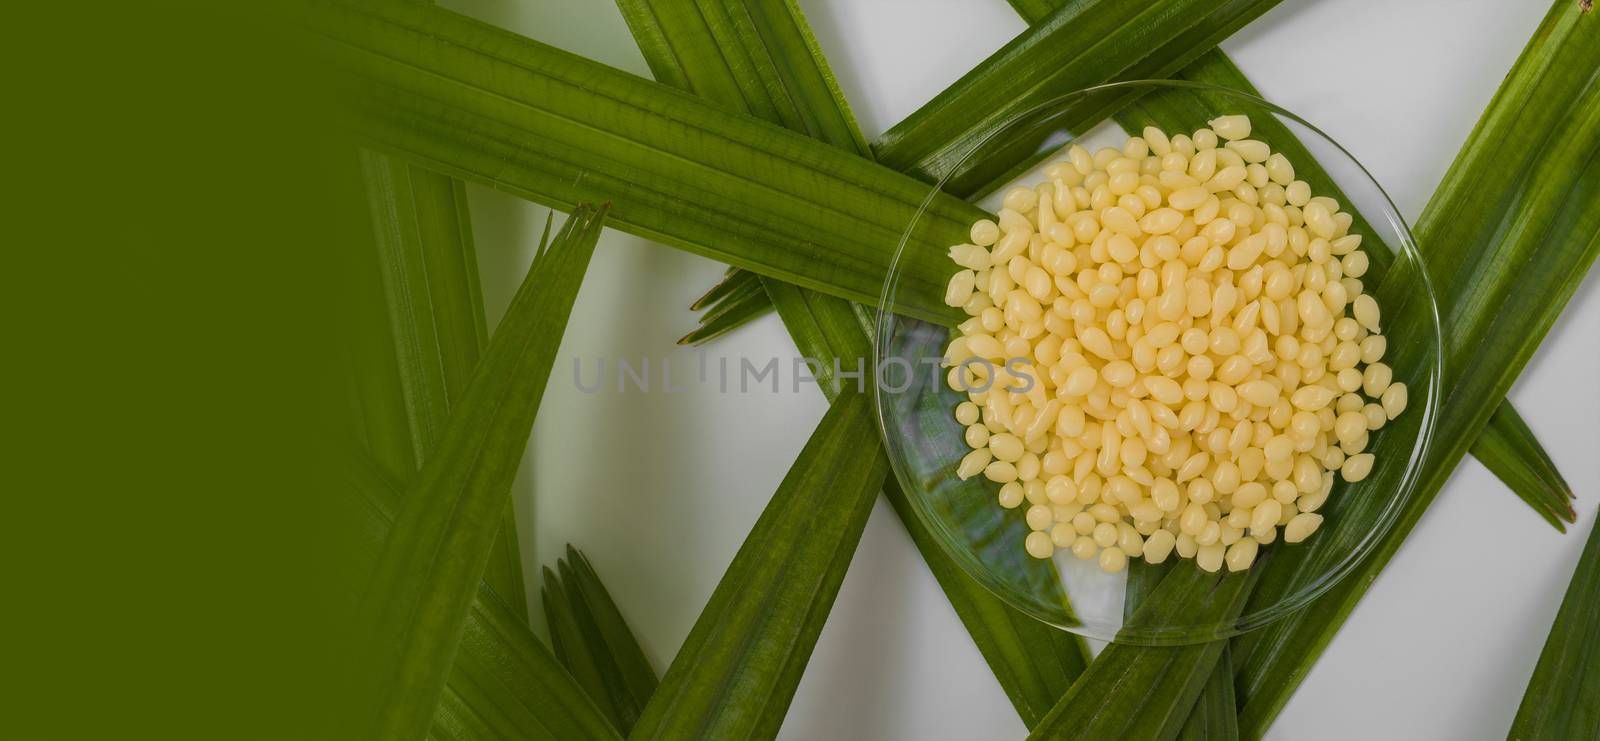 Candelilla Wax, Chemicals for beauty care on botany background. by chadchai_k